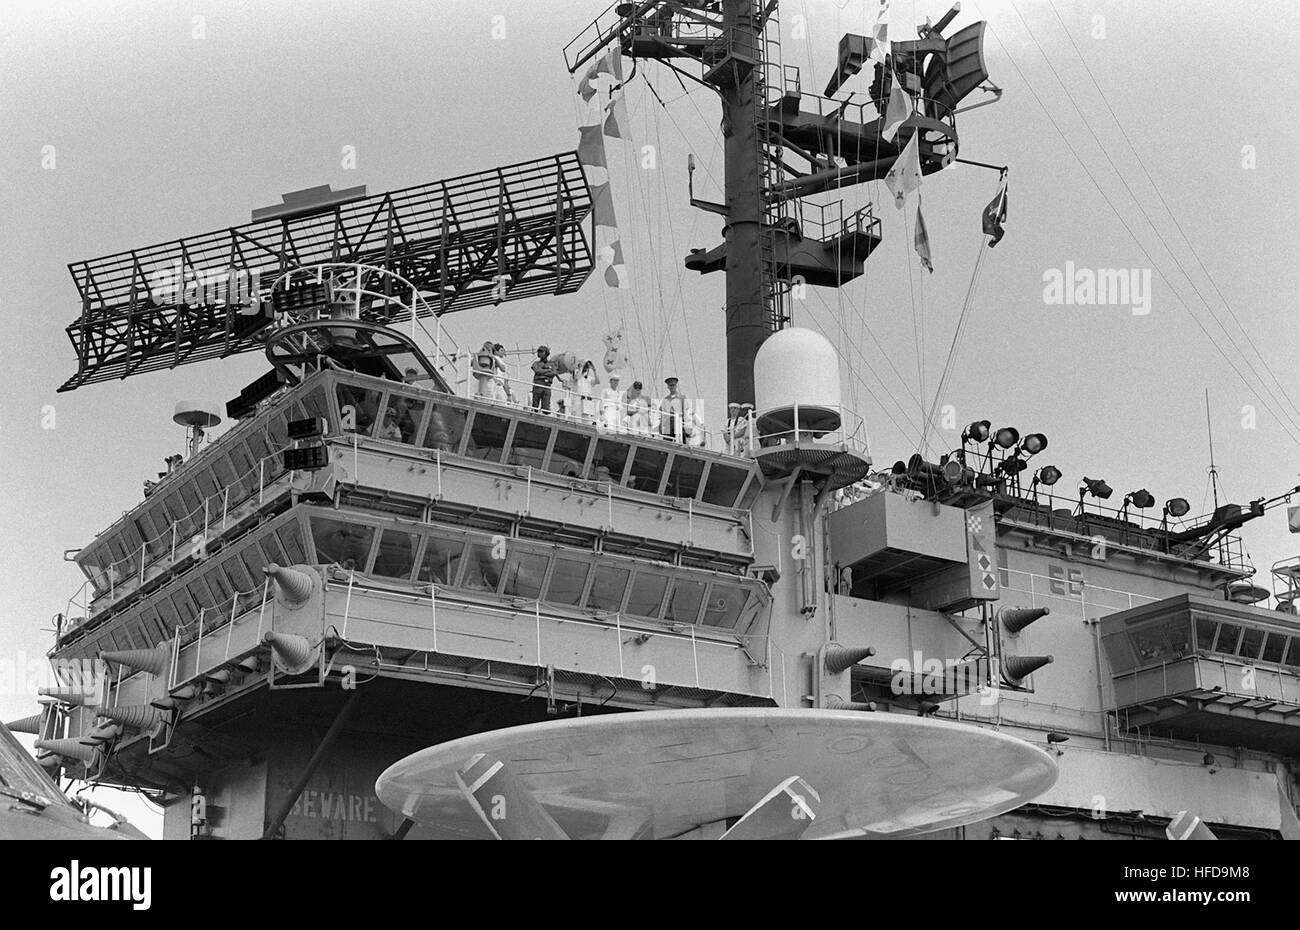 The island superstructure of the aircraft carrier USS KITTY HAWK (CV-63). The island of USS Kitty Hawk (CV-63) Pearl Harbor DNSN8200162 1981-04-15 Stock Photo